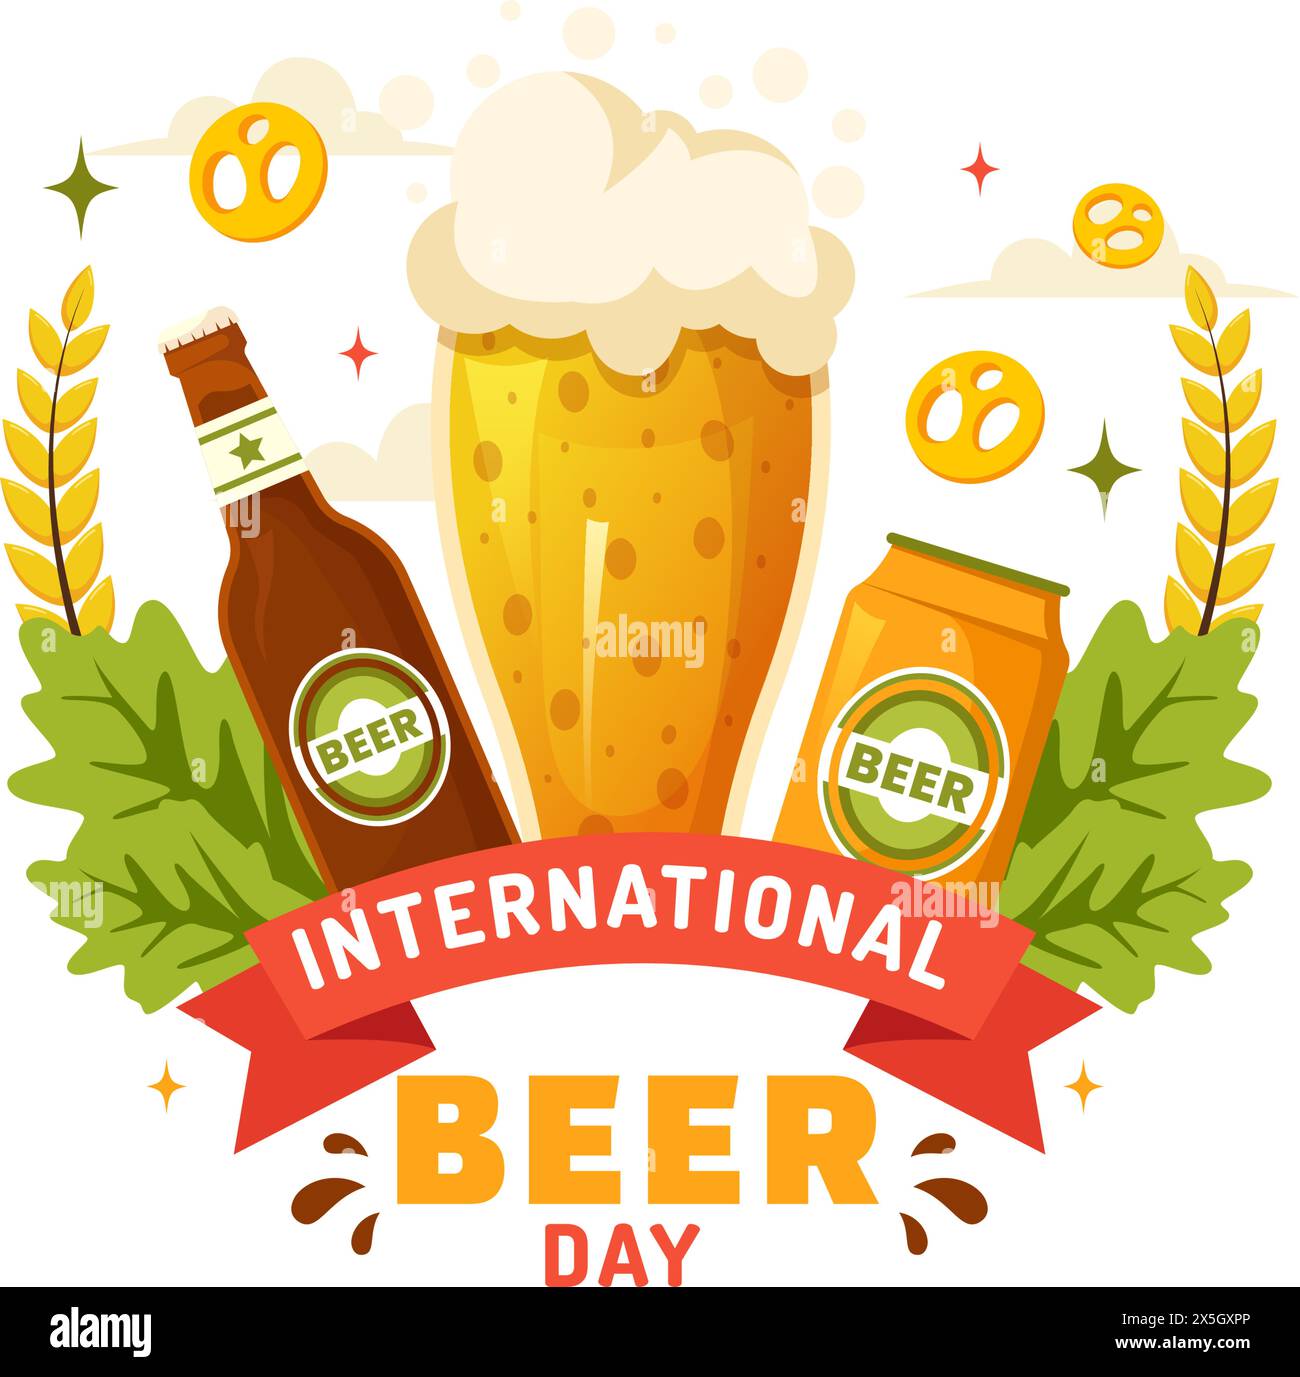 International Beer Day Vector Illustration on 5 August with Cheers Beers Celebration and Brewing in Flat Cartoon Background Design Stock Vector